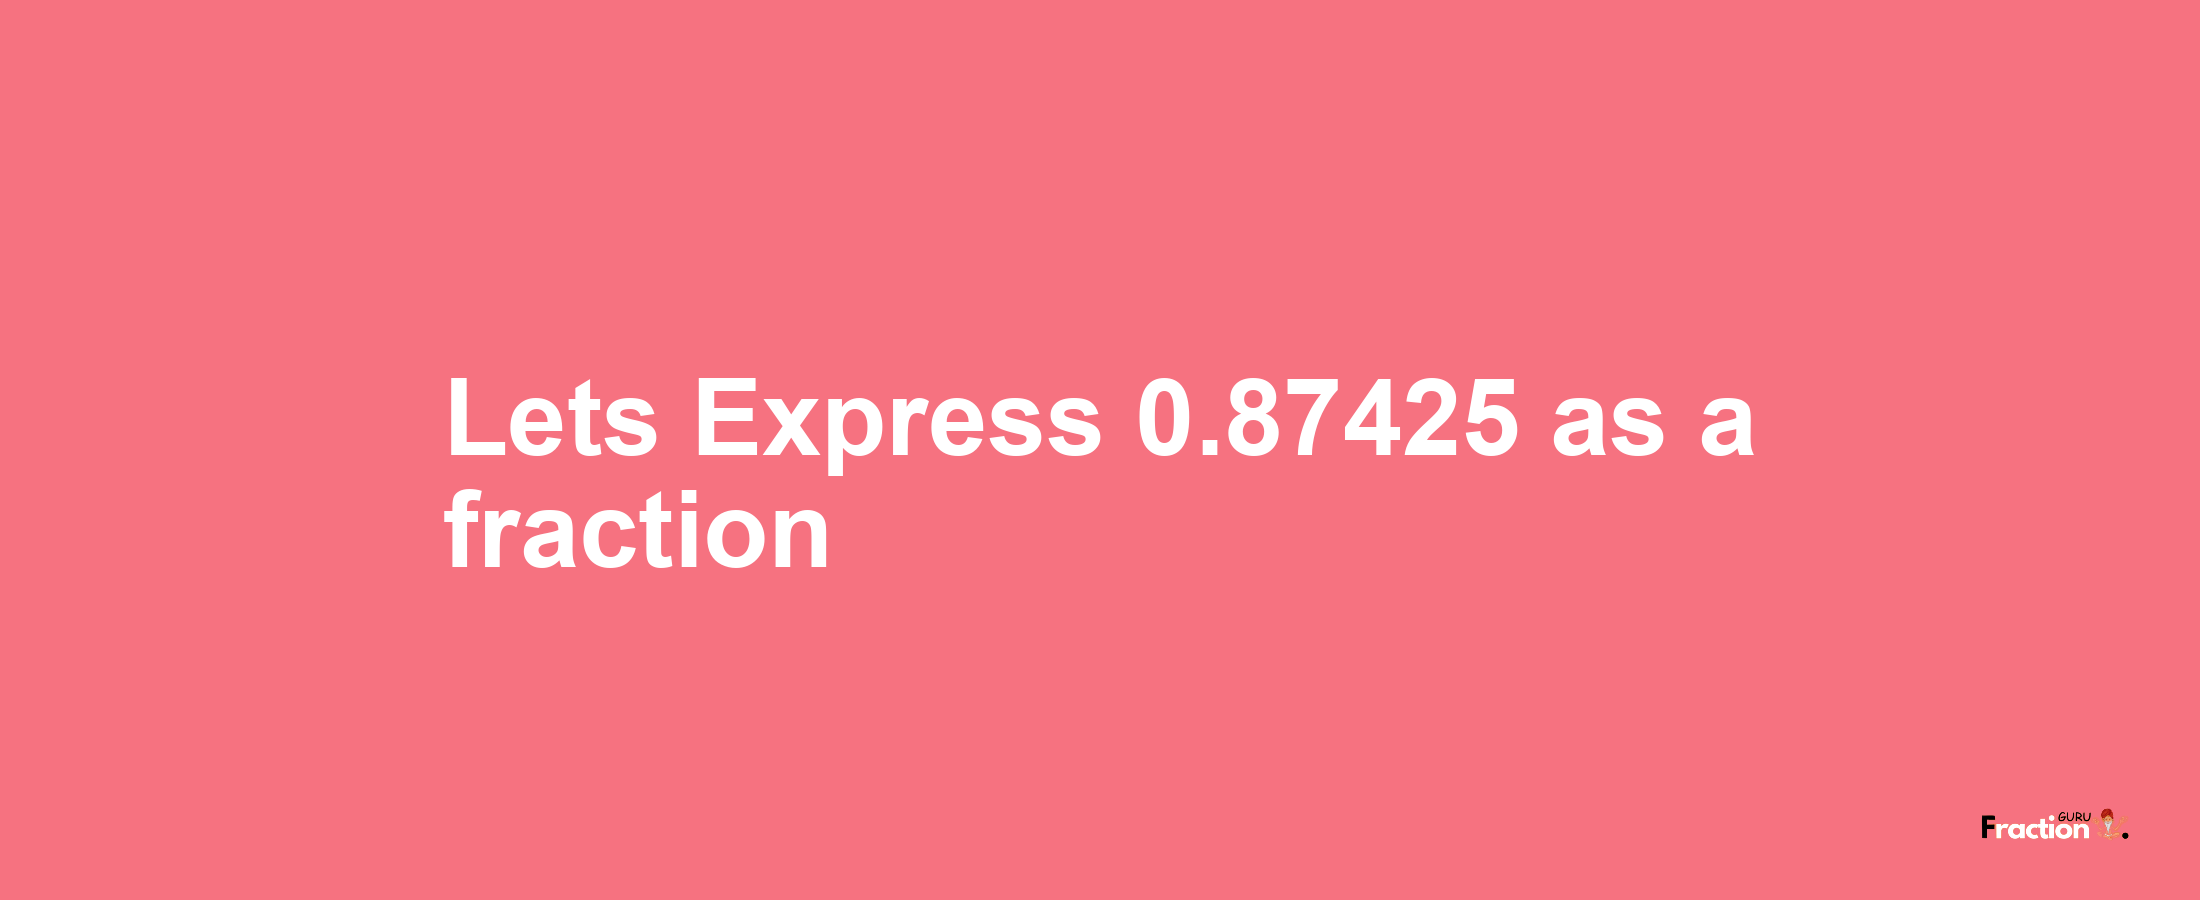 Lets Express 0.87425 as afraction